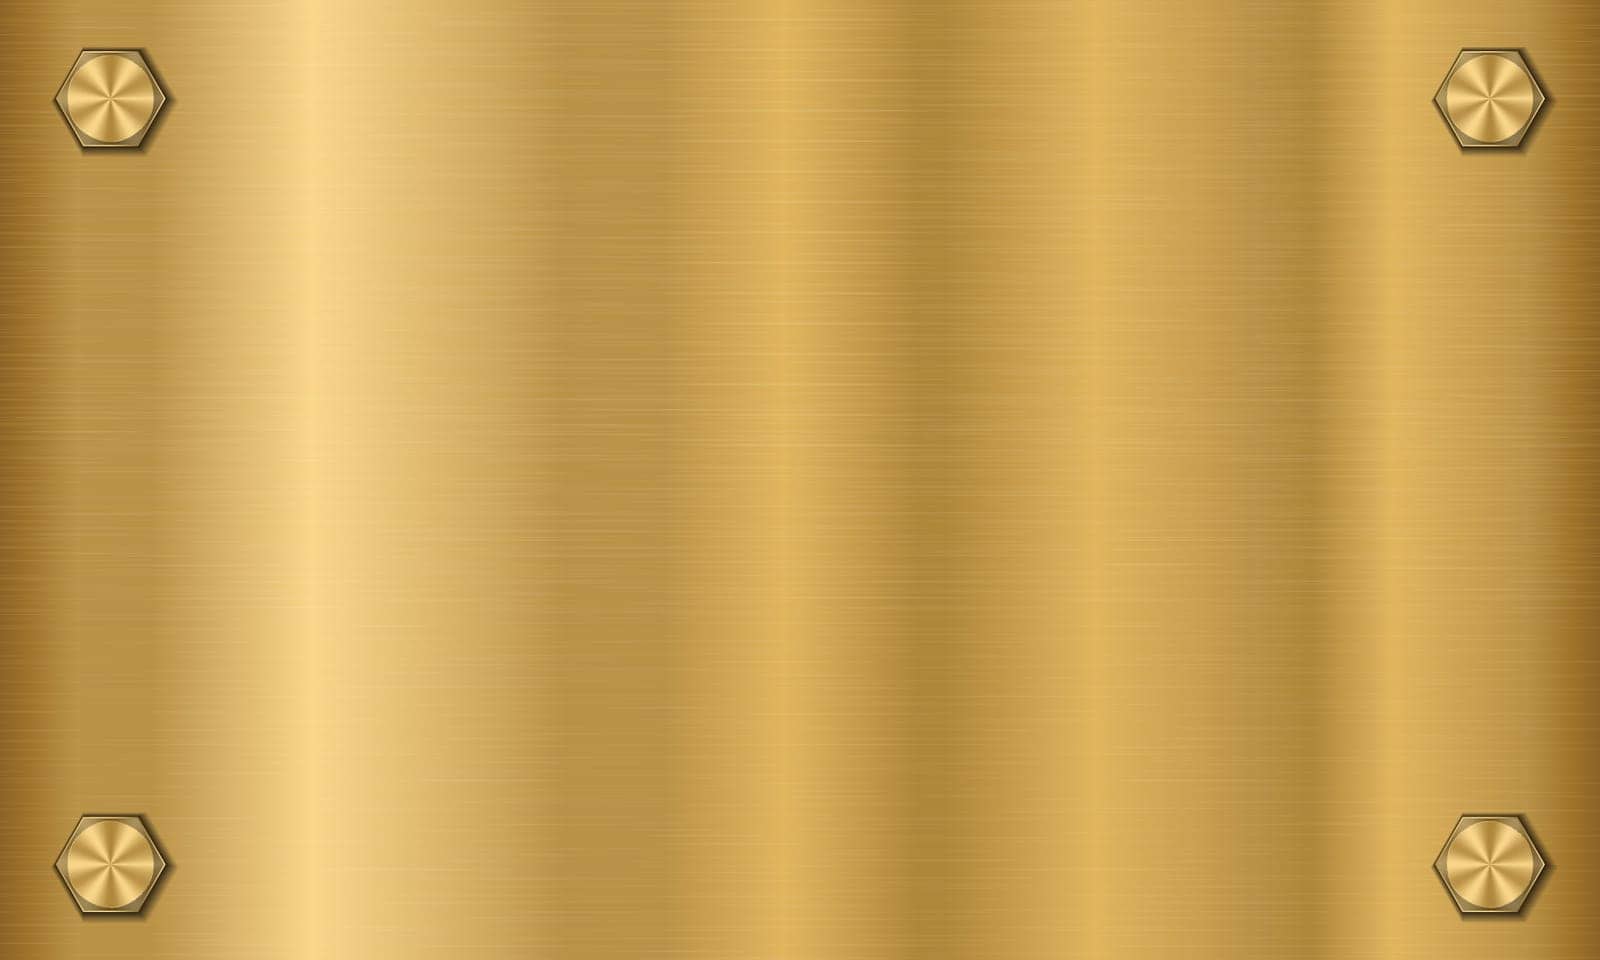 Golden metal texture background with bolts. Gold plate with bolts. Metallic texture effect. Steel background. Vector illustration